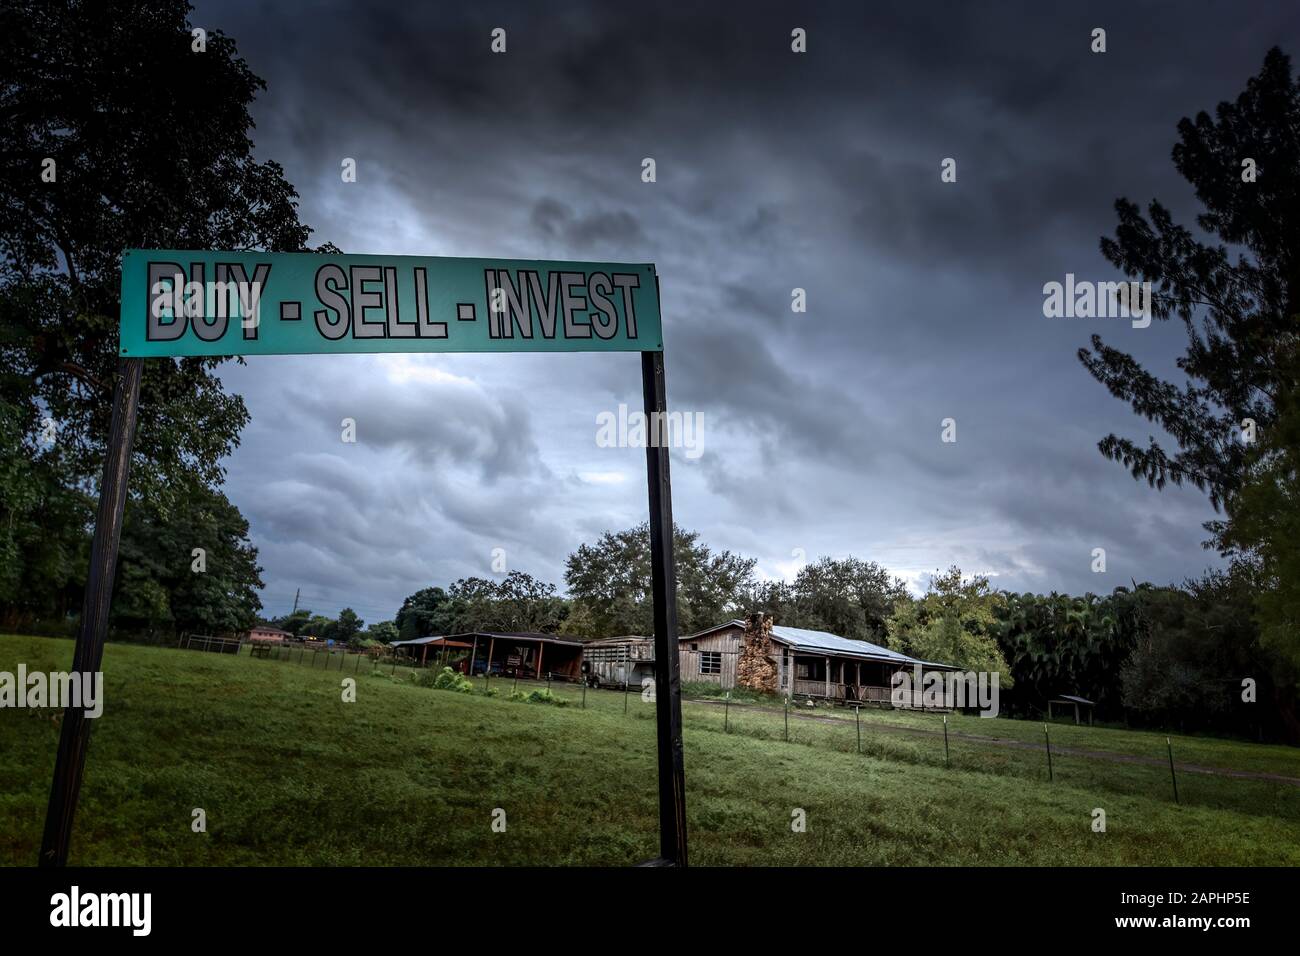 A Real Estate sign in a rural area of Florida tells you to buy, sell, or invest. Stock Photo